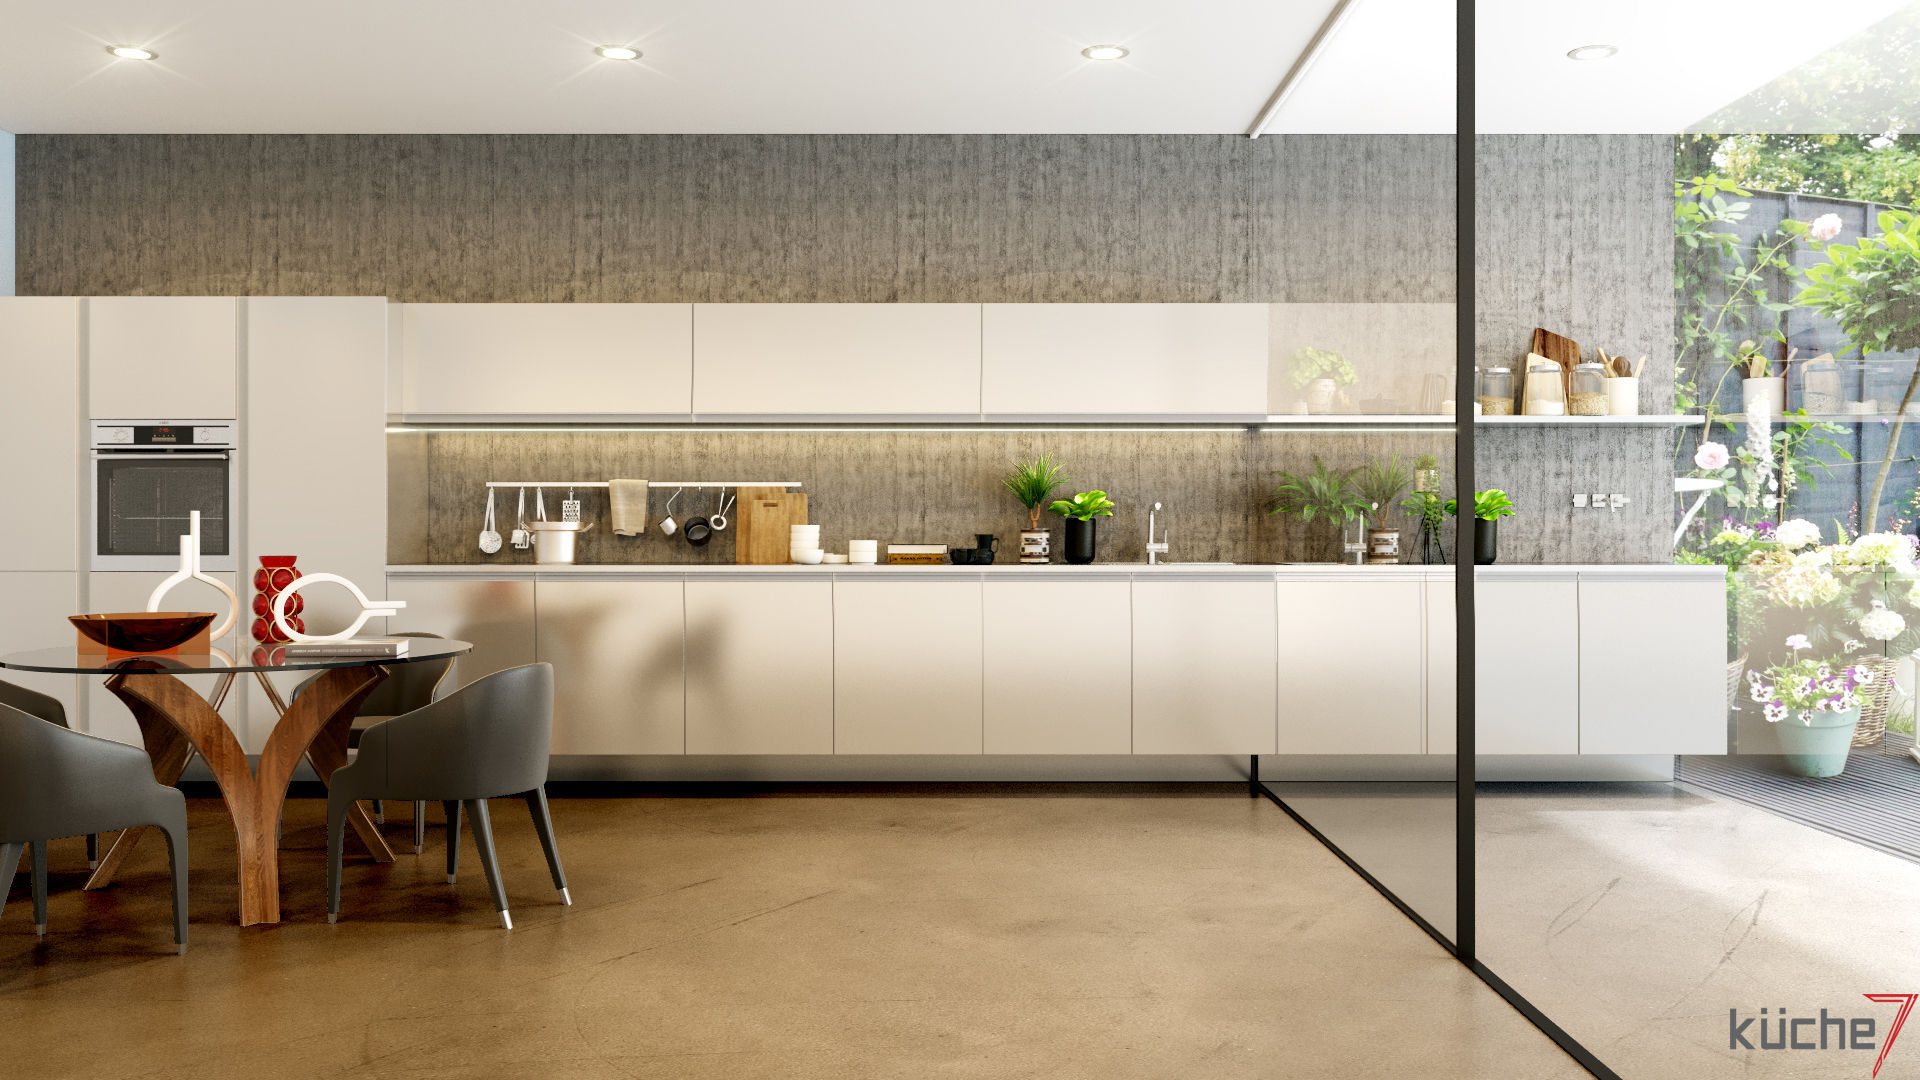 Luxury kitchens that outclasses all other kitchens you've seen, Küche7 Küche7 Cocinas integrales